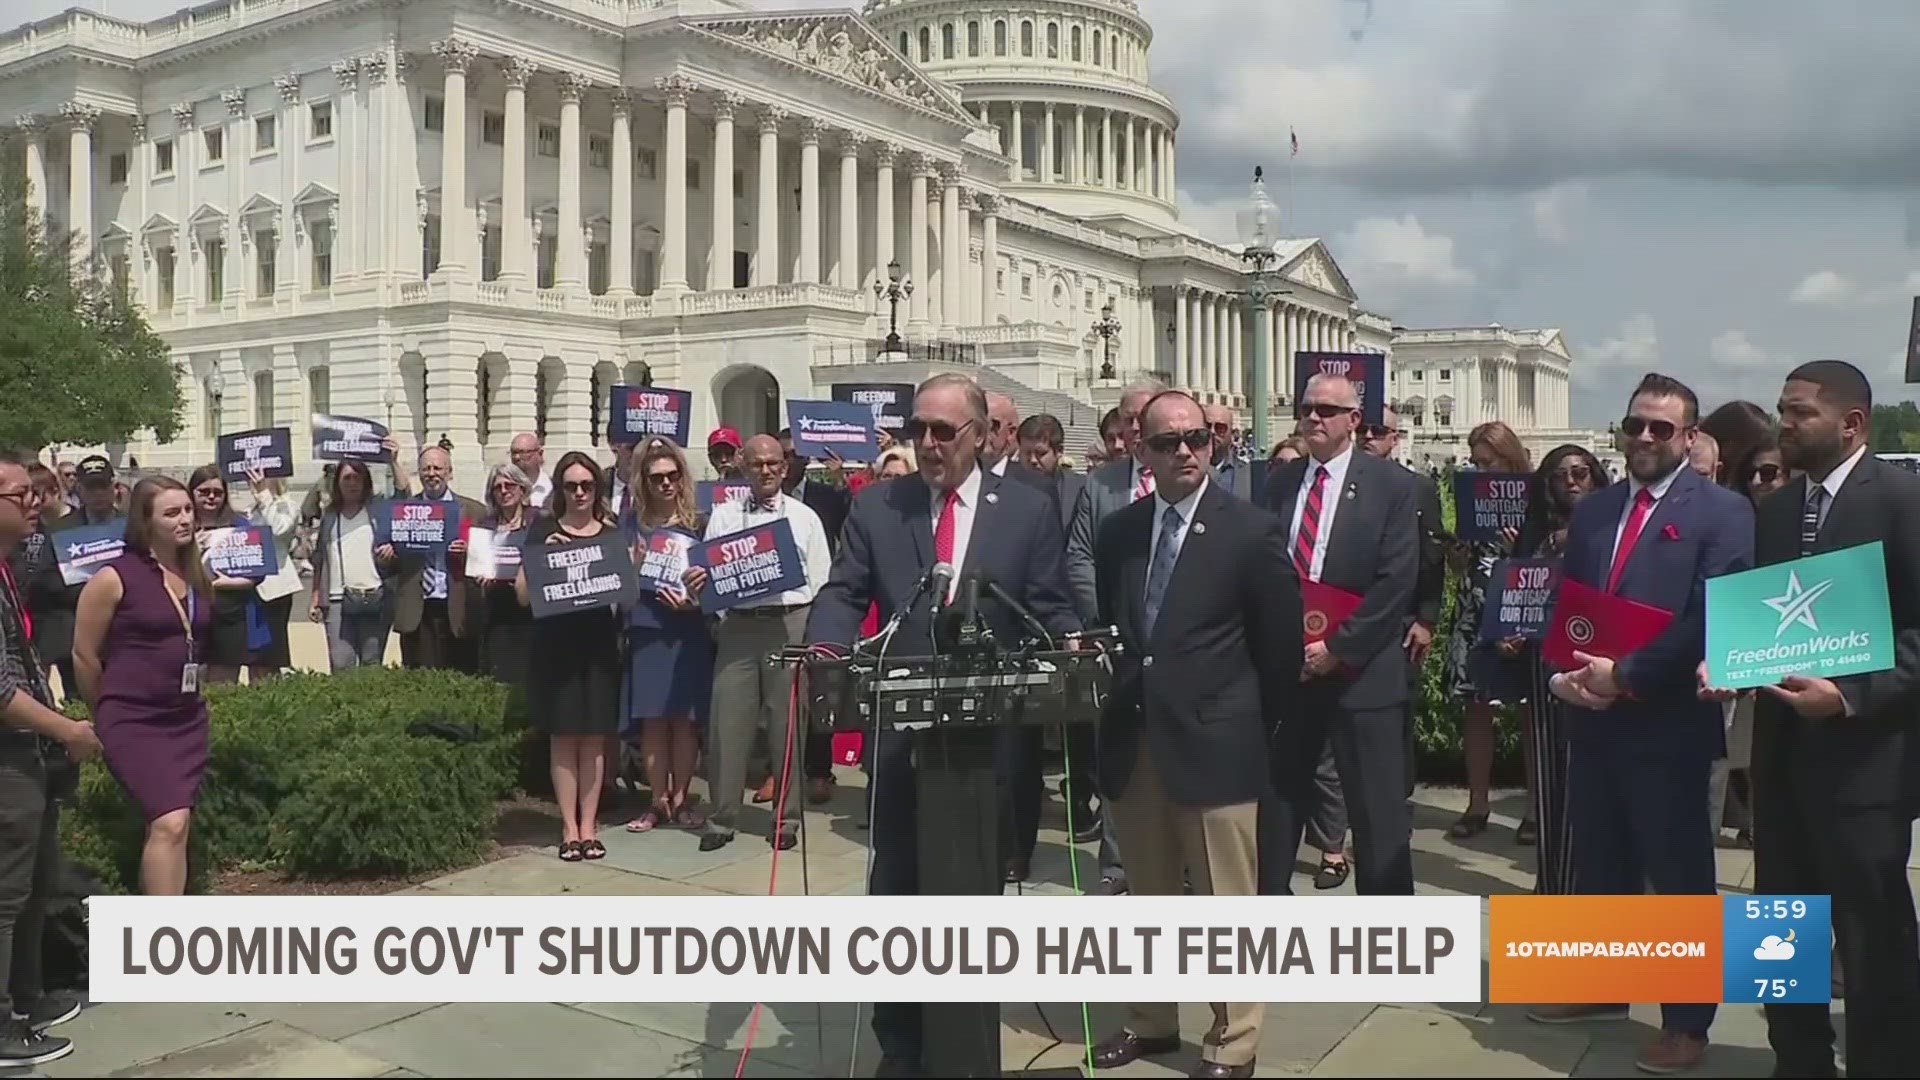 A spending standoff risks a government shutdown which could cause government agencies like FEMA to run out of money.